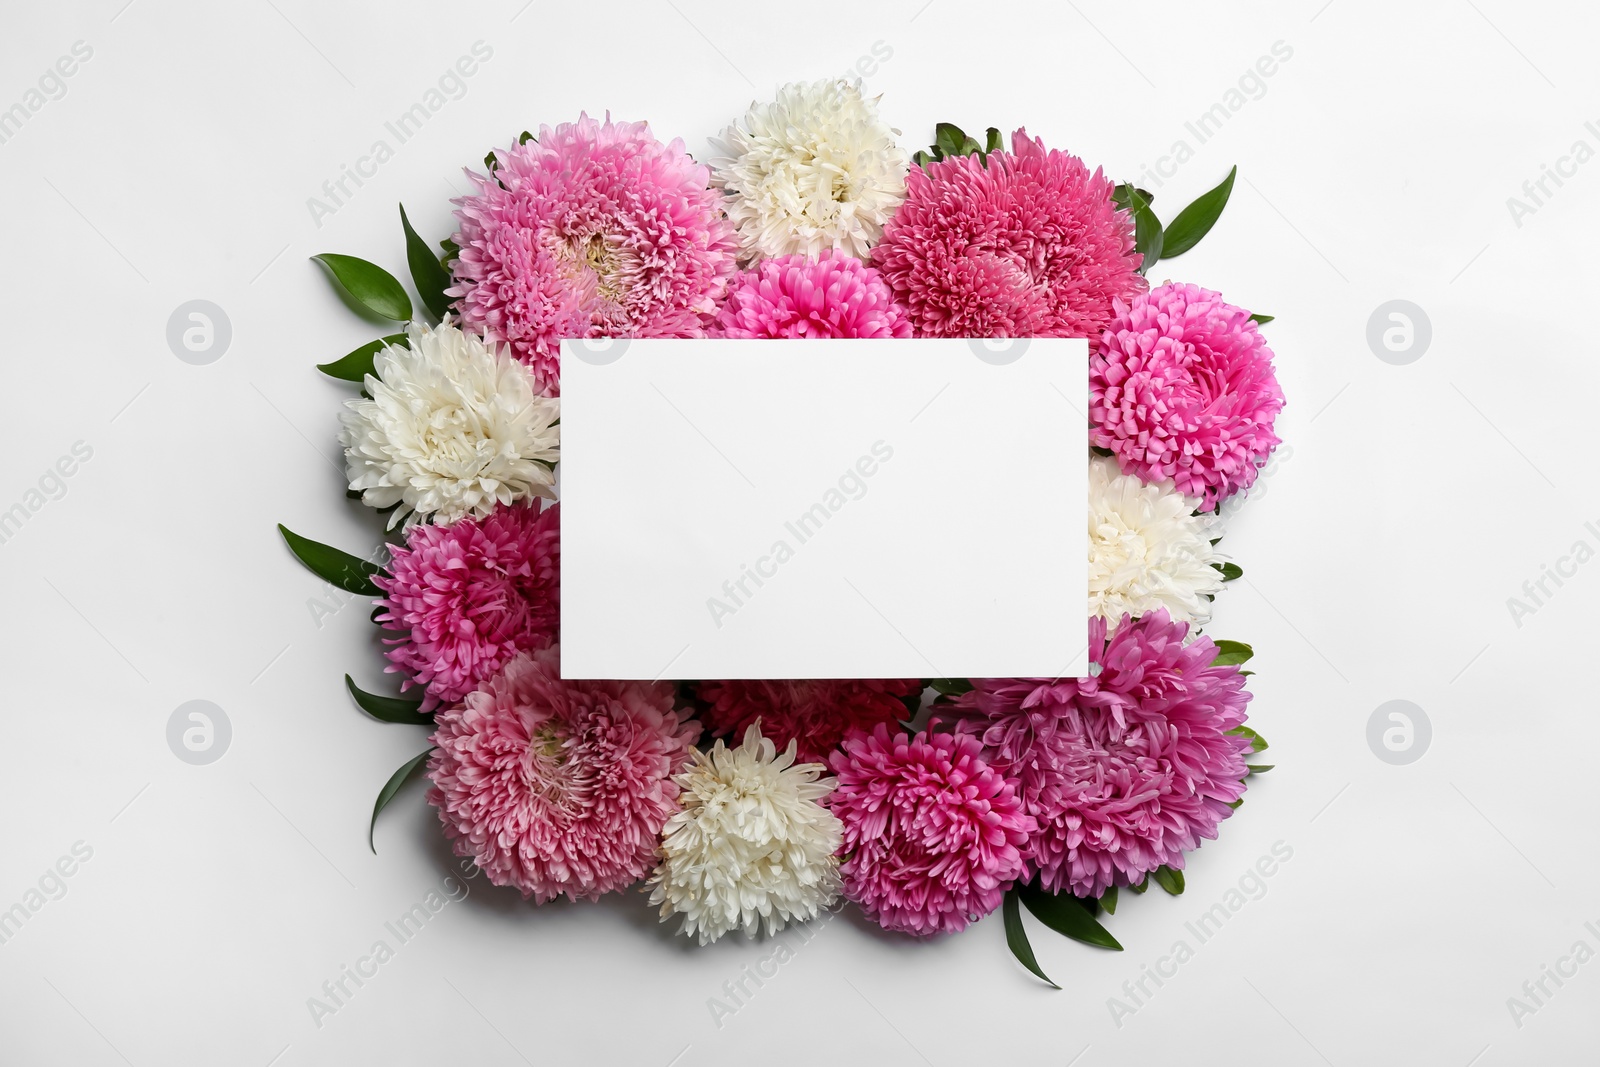 Photo of Composition with blank card and beautiful asters on white background, top view. Autumn flowers